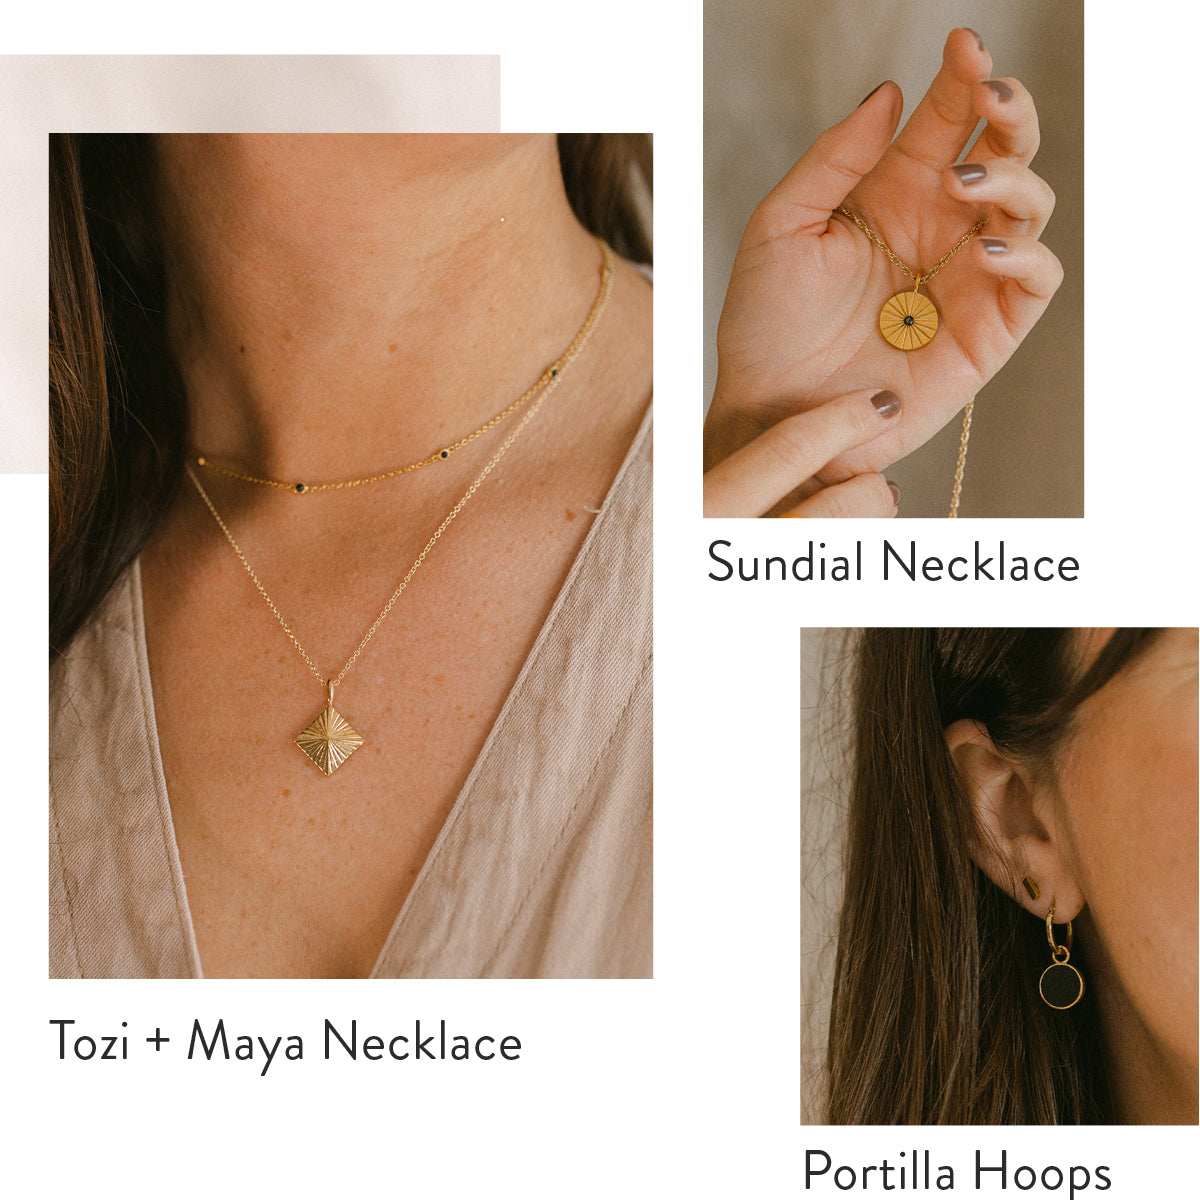 Sundial Necklace. Tozi and Maya Necklace. Portilla Hoops.